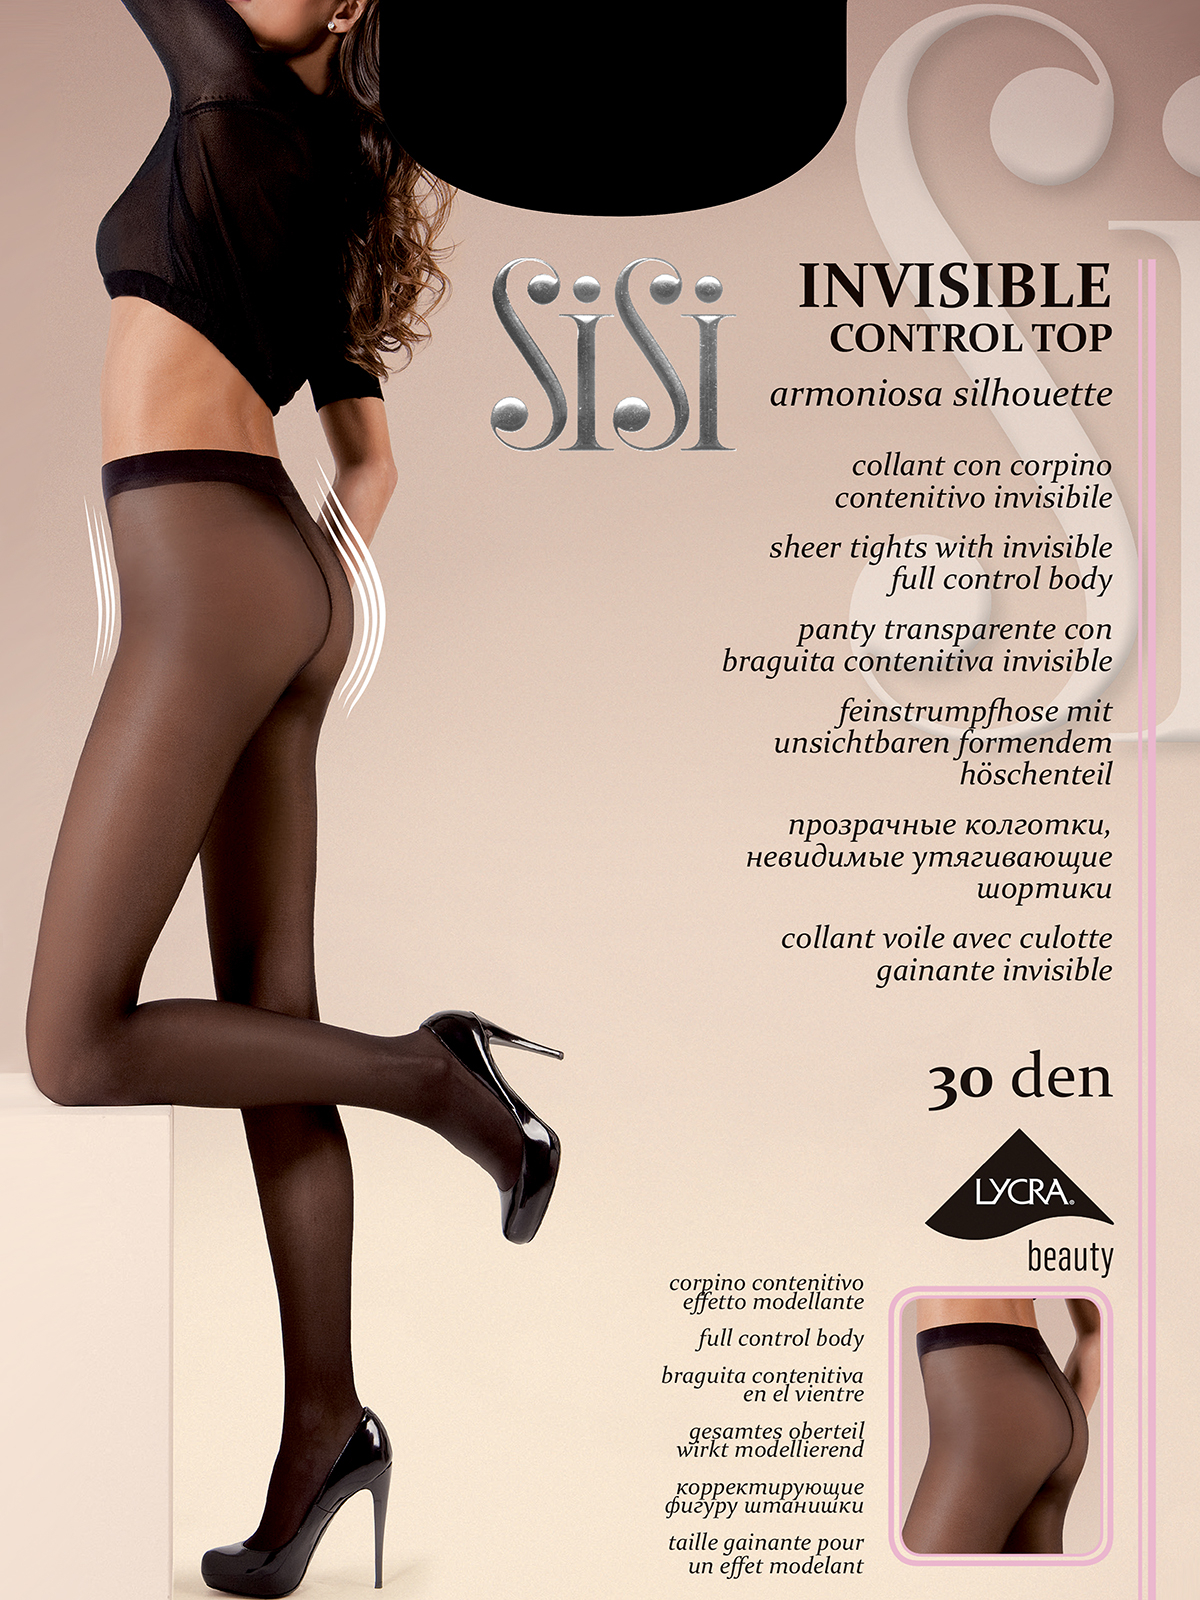 INVISIBLE CONTROL TOP 30 SiSi